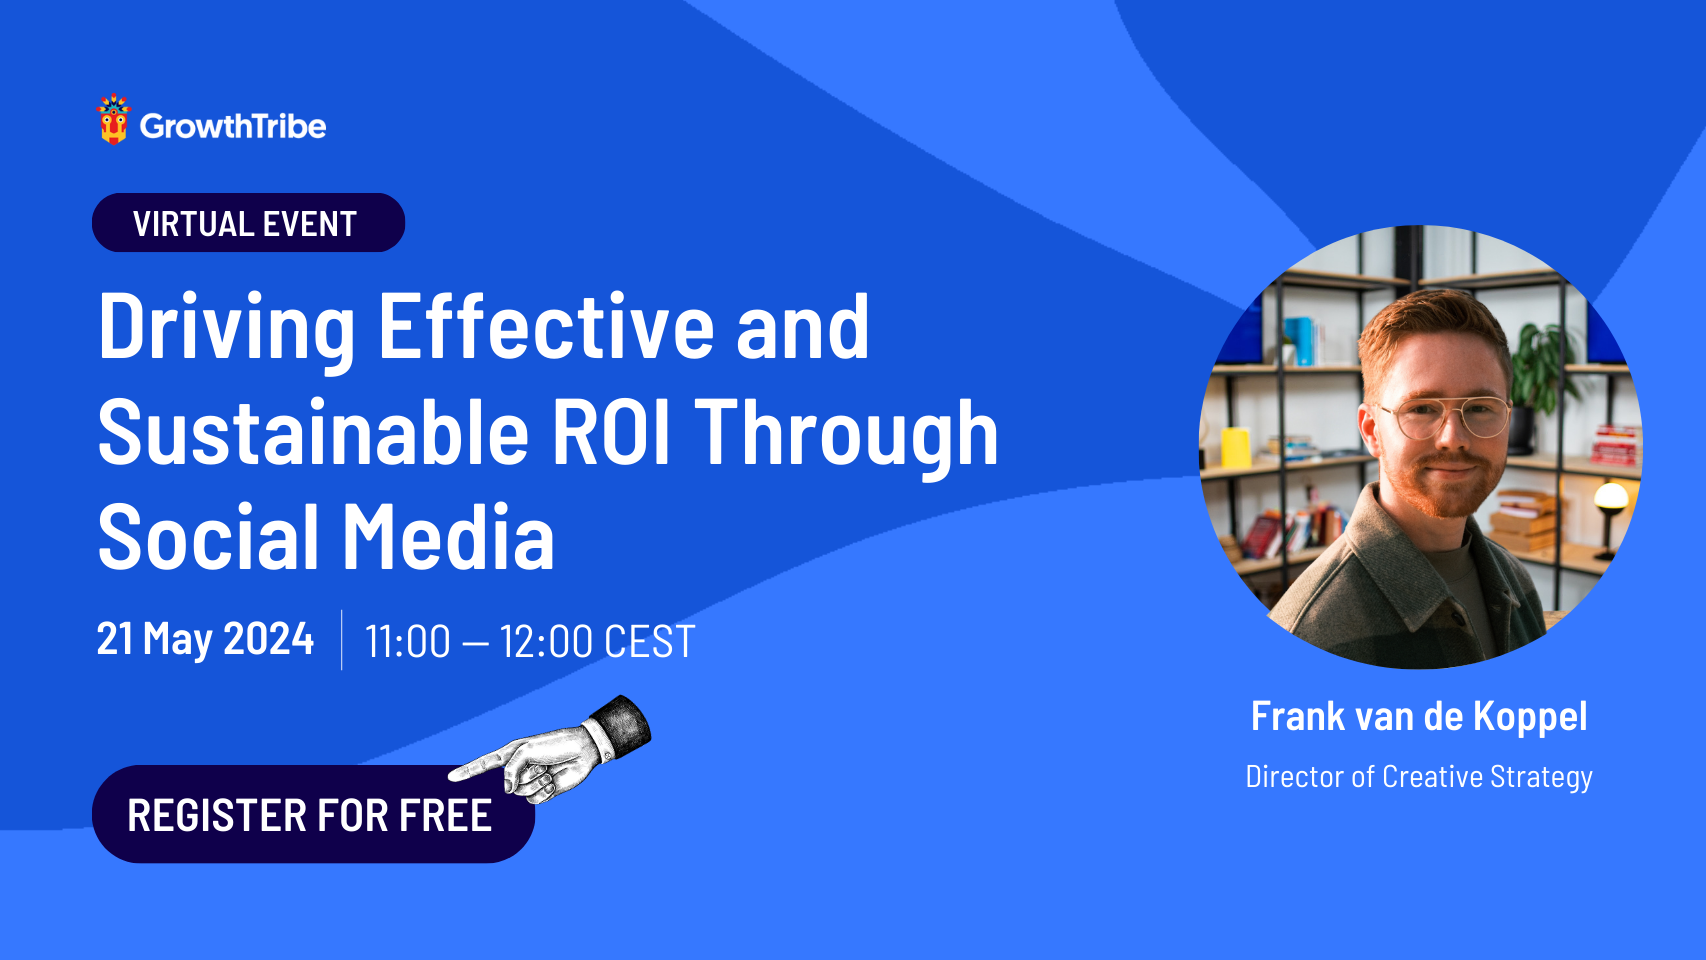 New Driving Effective and Sustainable ROI Through Social Media